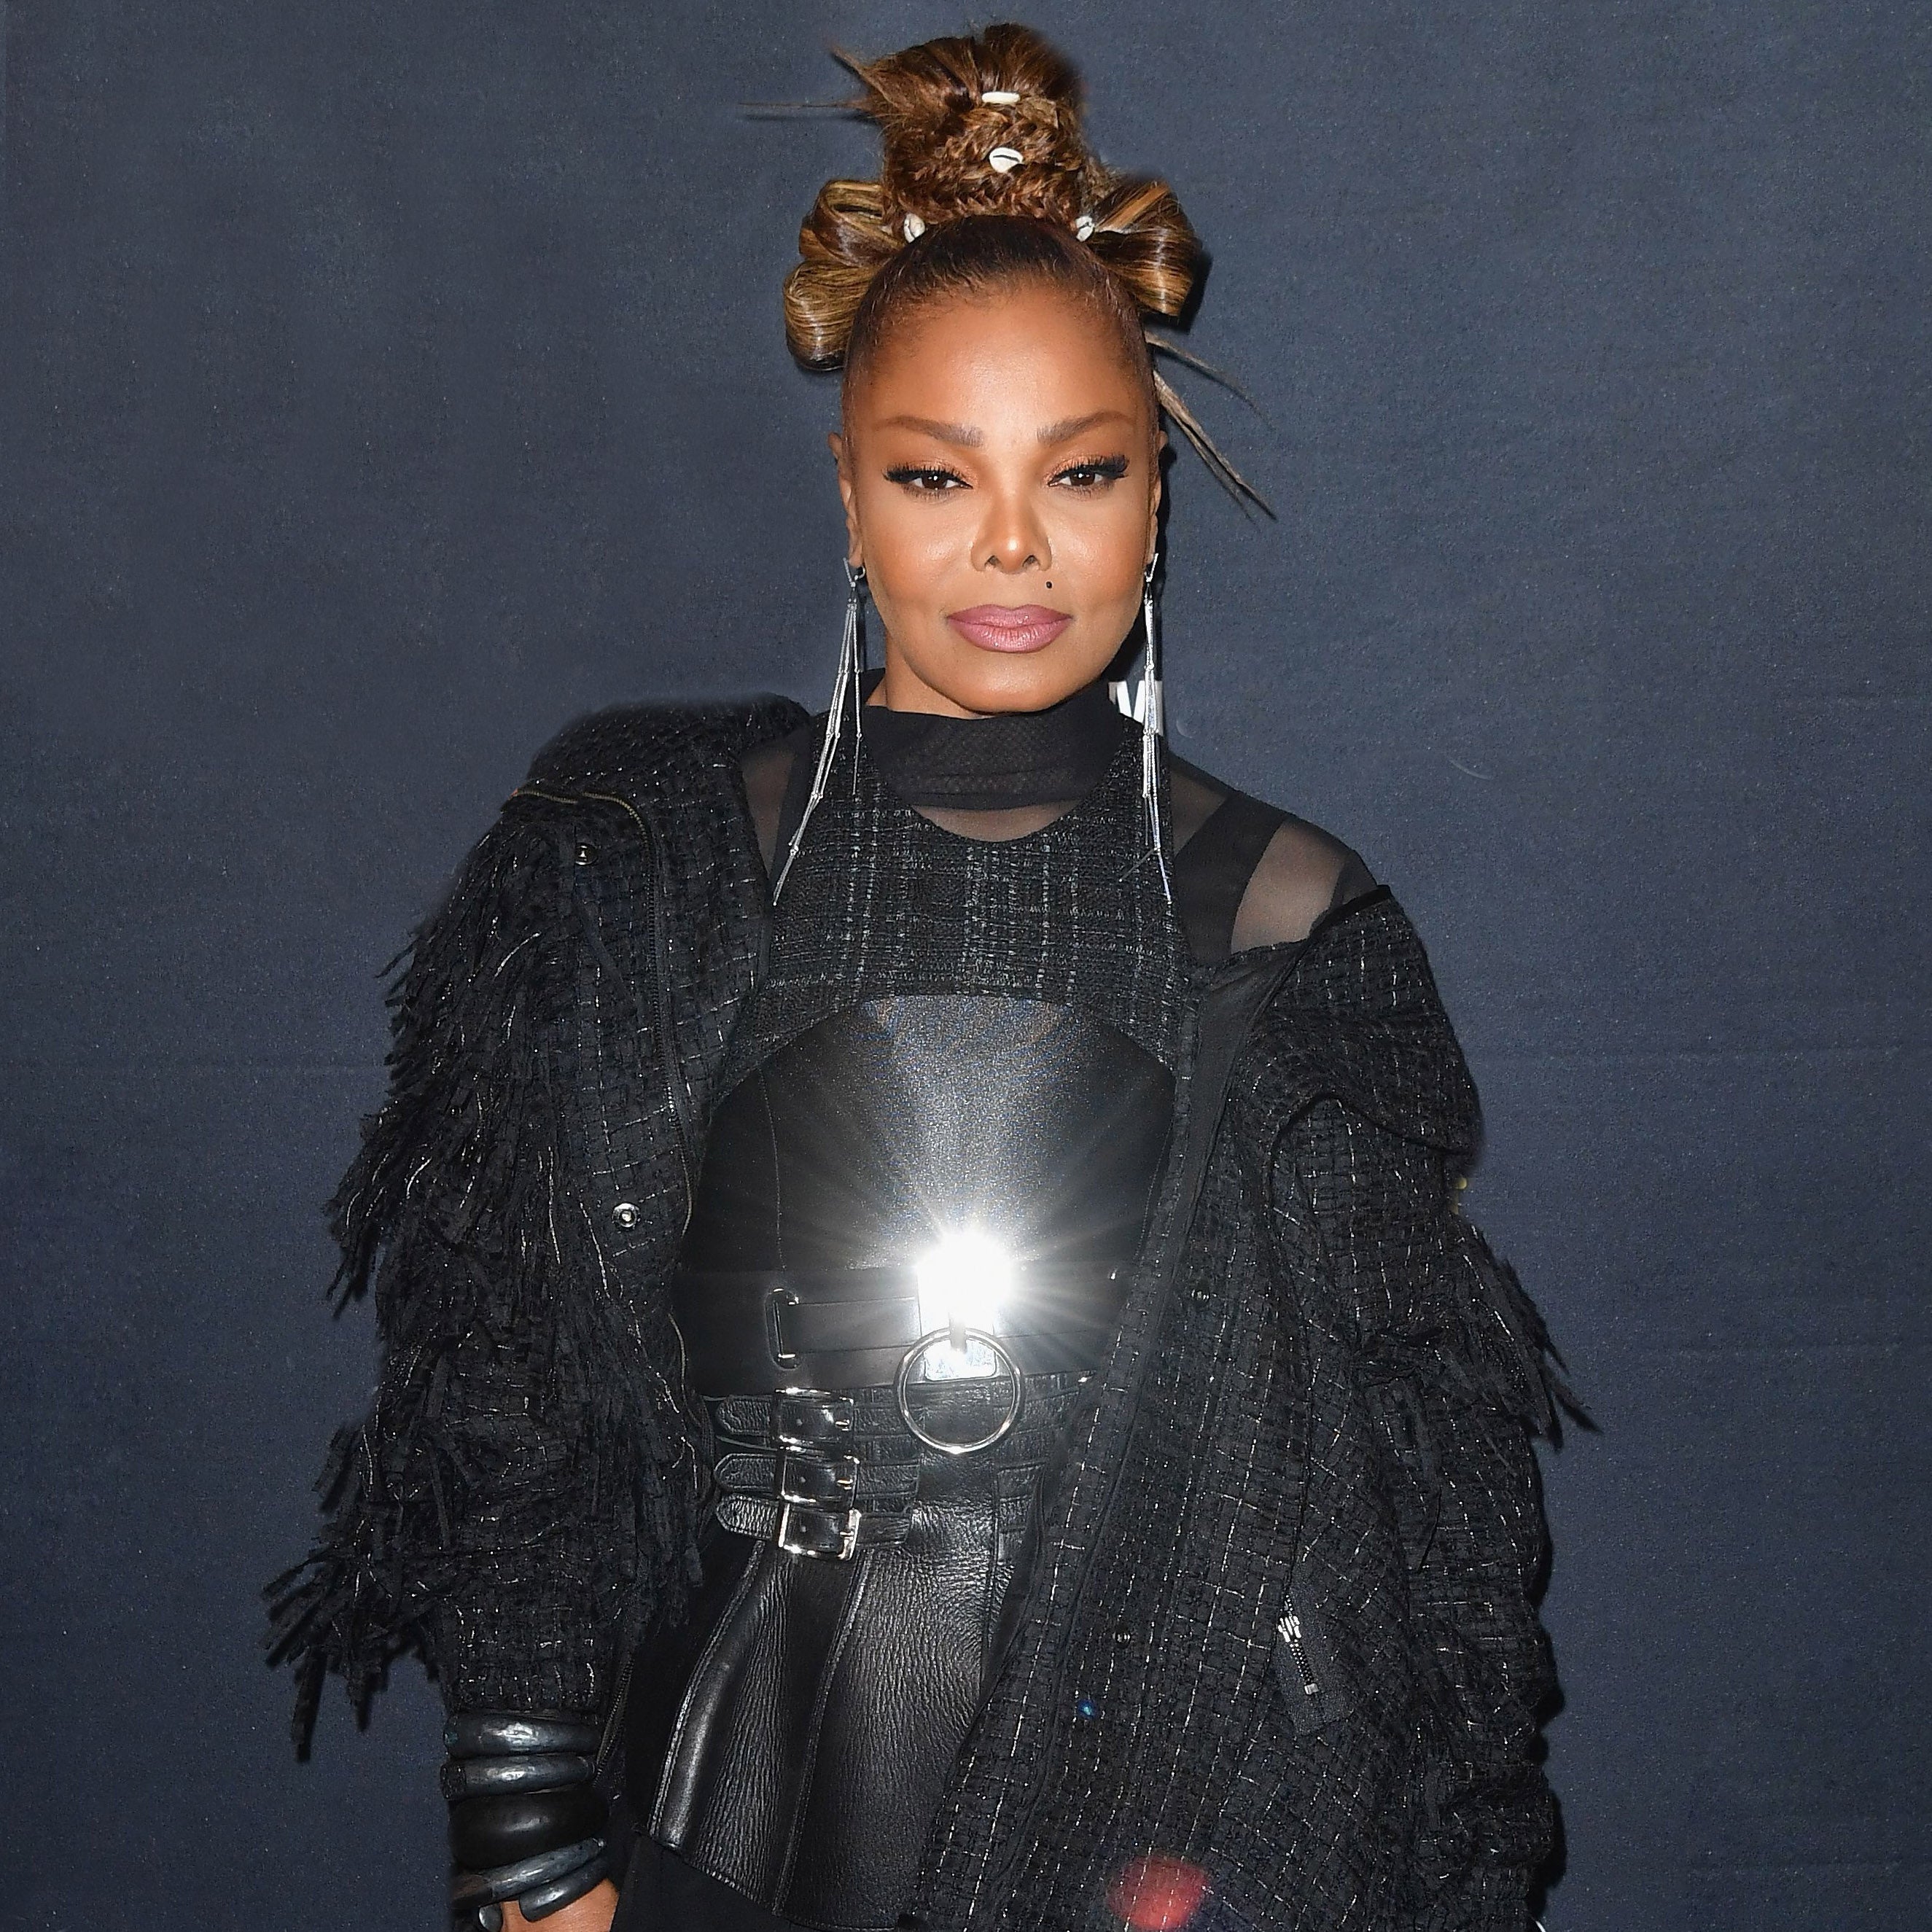 Janet Jackson Thanks Family As She Accepts Rock & Roll Hall Of Fame Induction